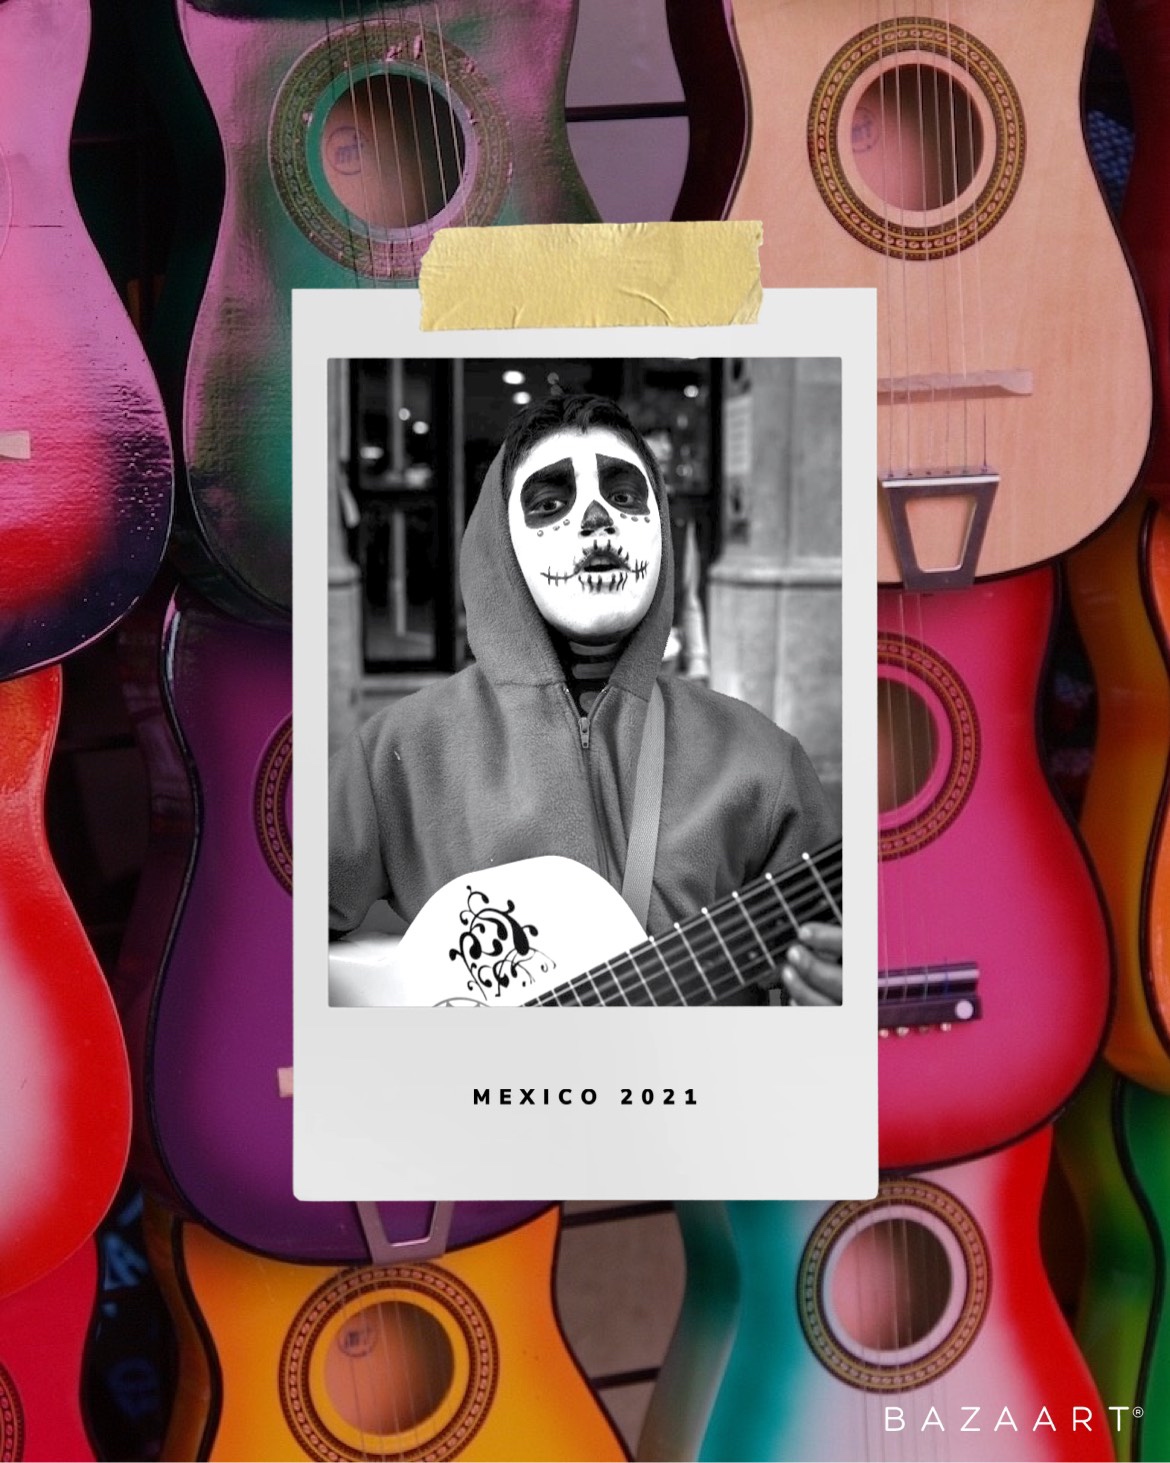 A Photo Of A Man With A Guitar In Front Of Colorful Guitars Day Of The Dead Template